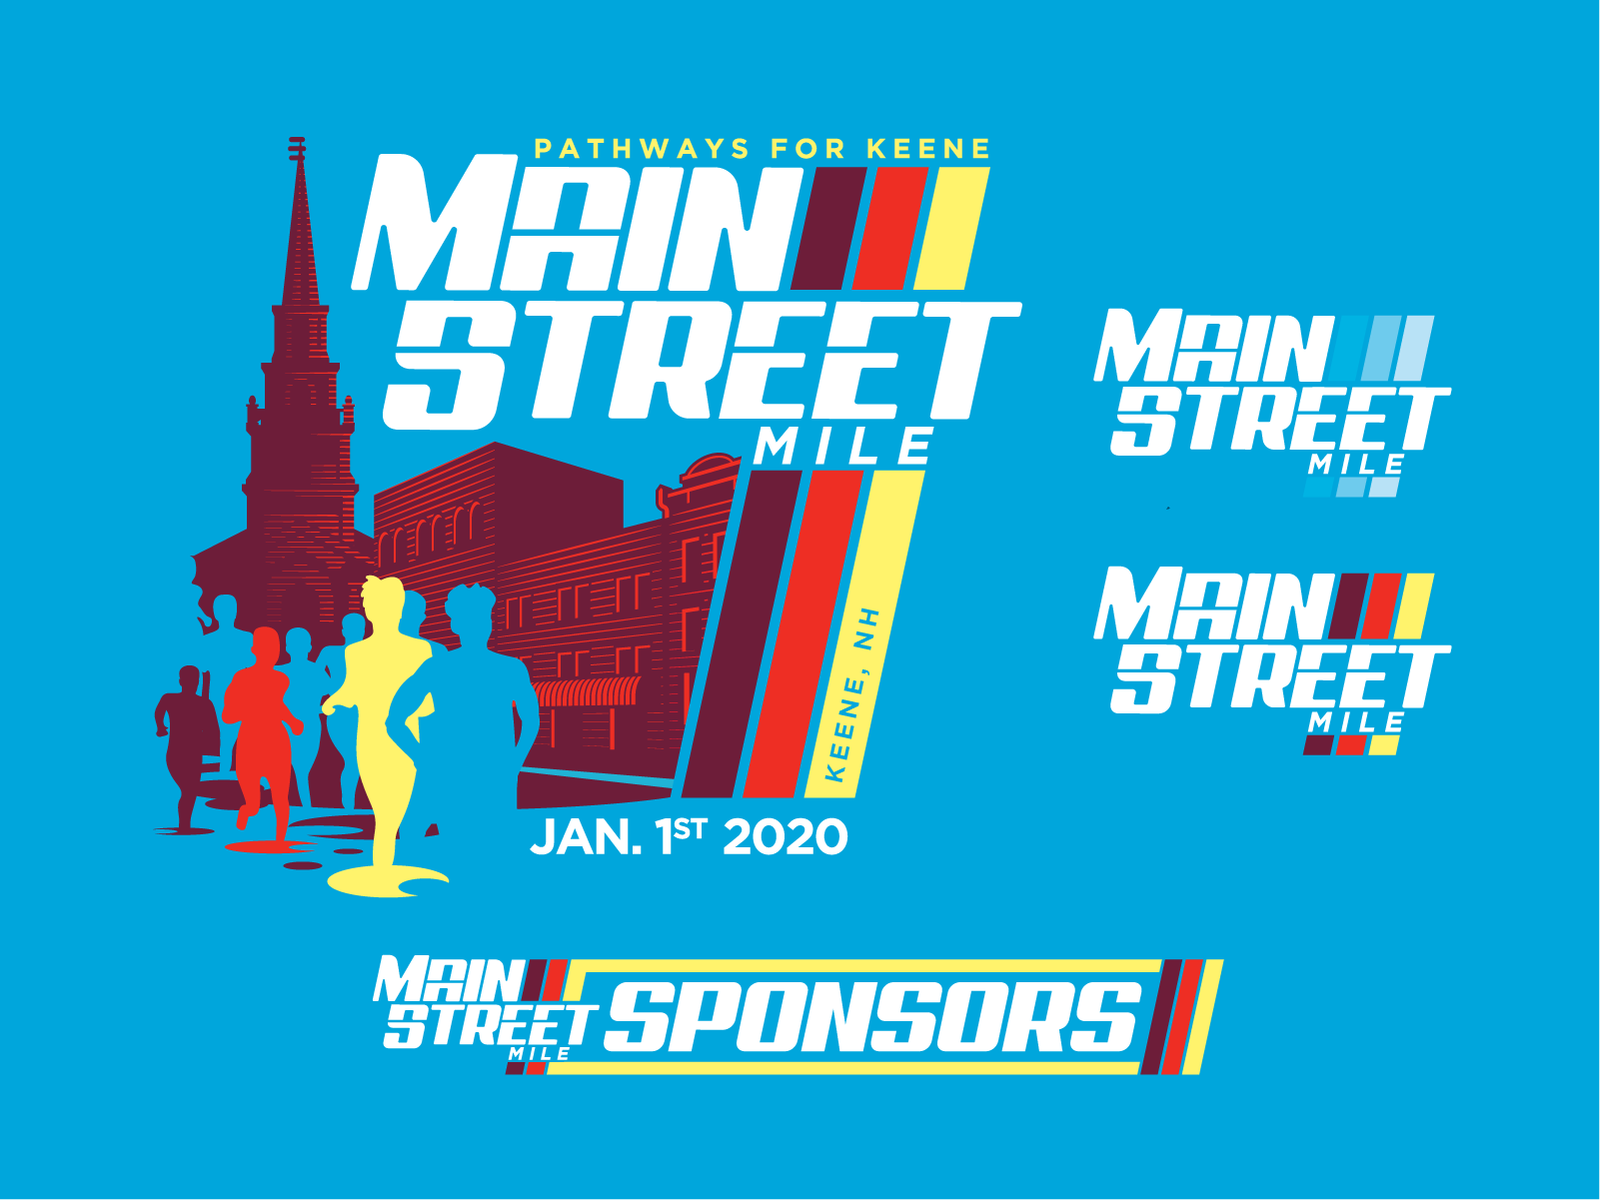 Main Street Mile Round 2 by Rick Barker on Dribbble